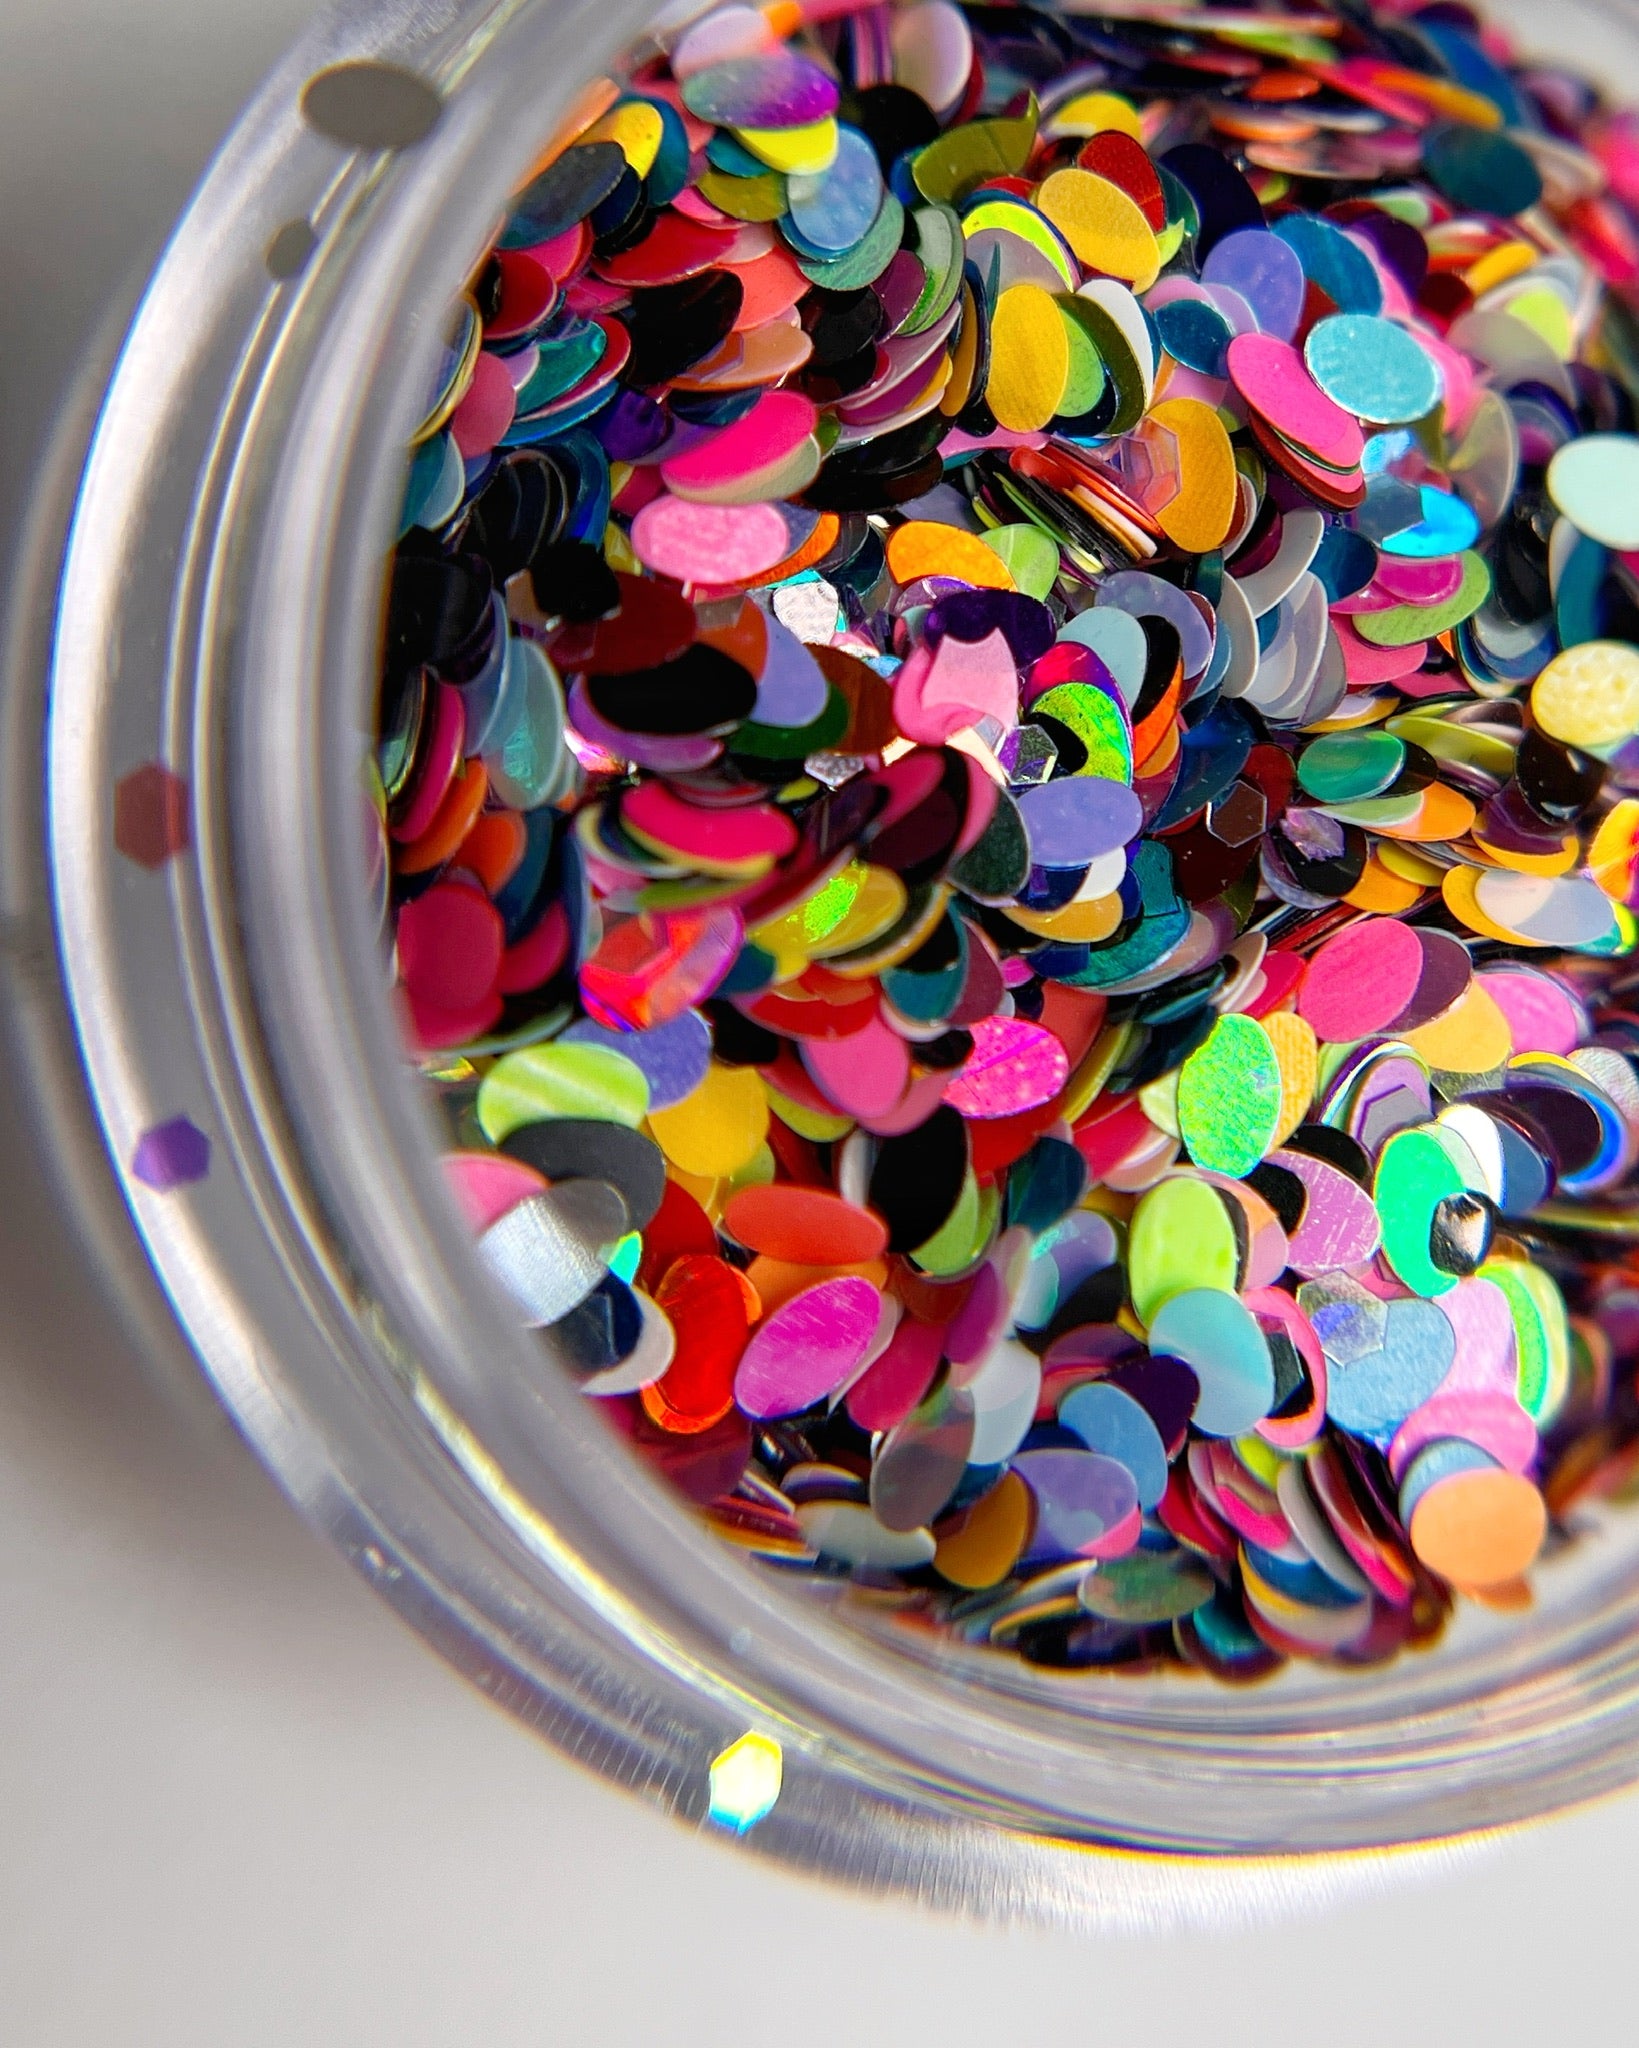 Glitter mix in clear jar on white background. 